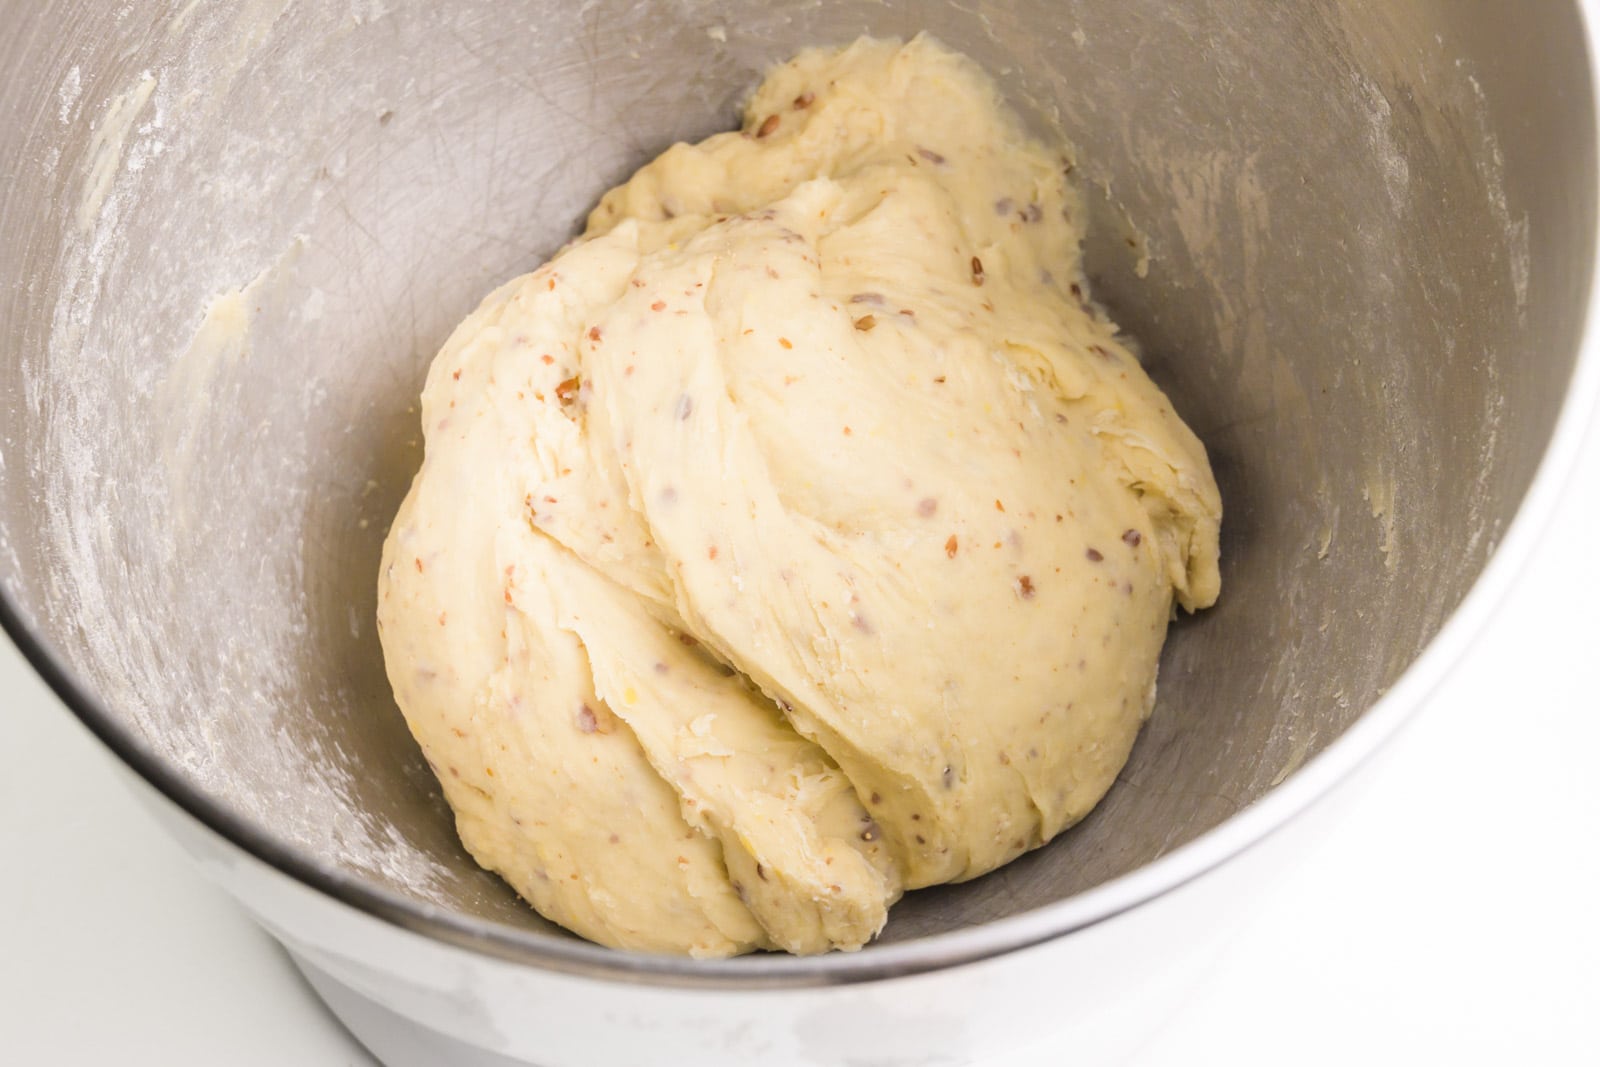 Dough is in the bottom of a bowl.